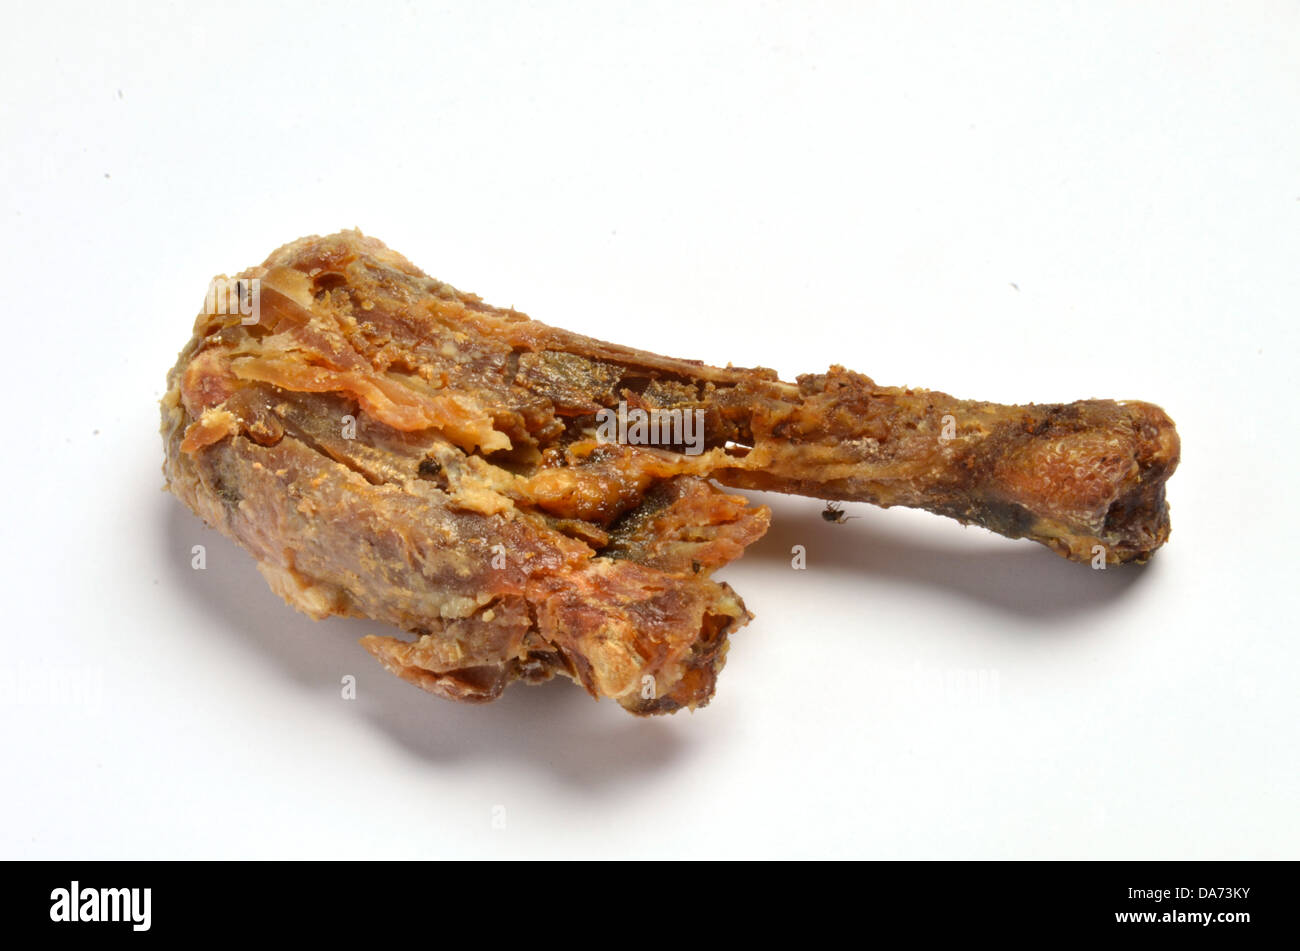 Old decomposing, dried rotten chicken piece Stock Photo